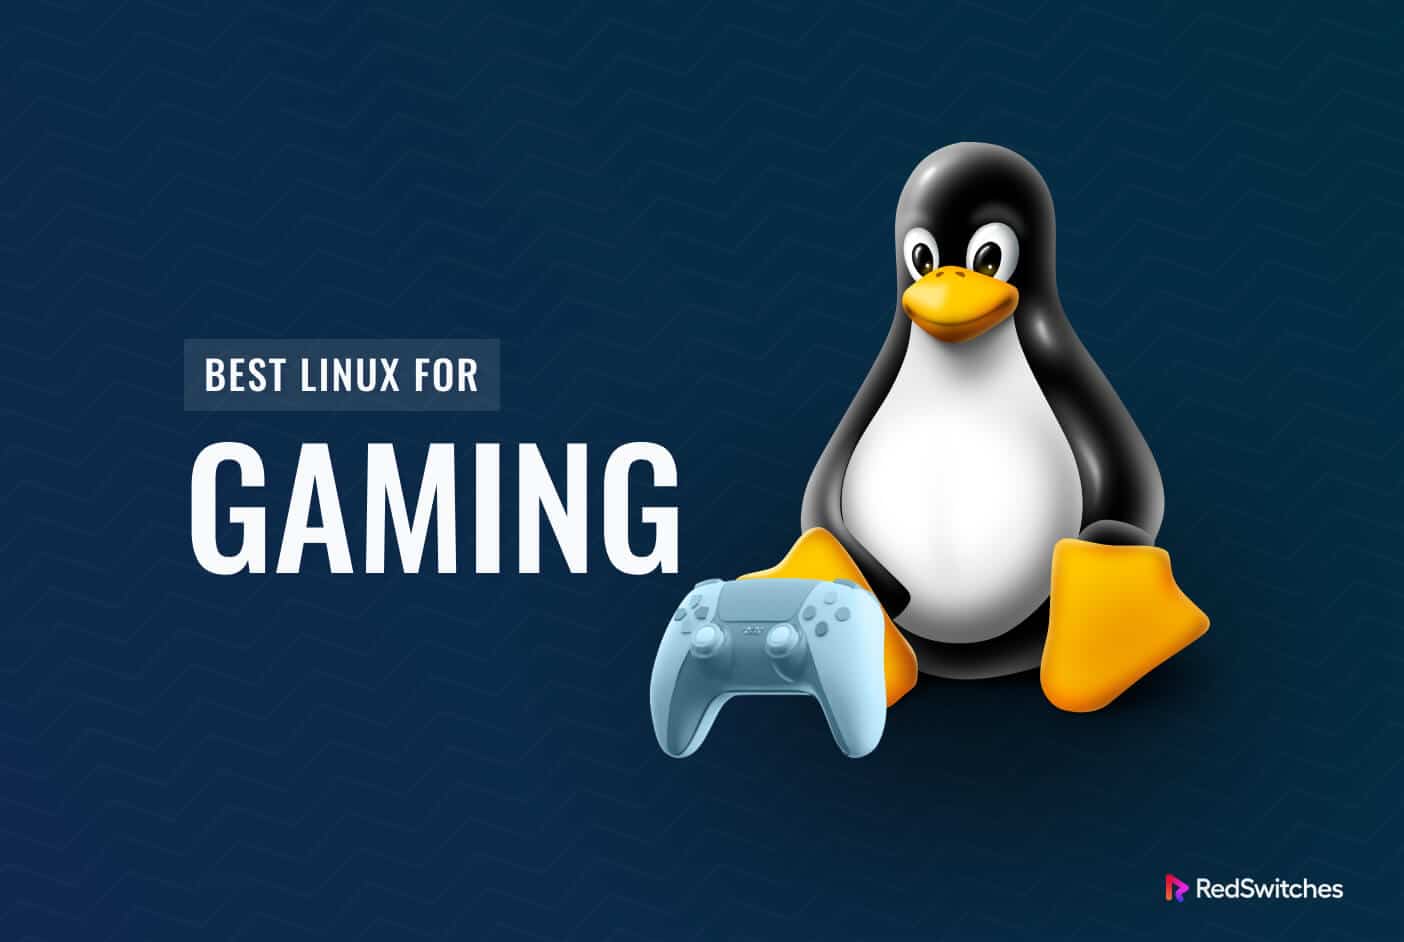 42 More of the Best Free Linux Games - LinuxLinks